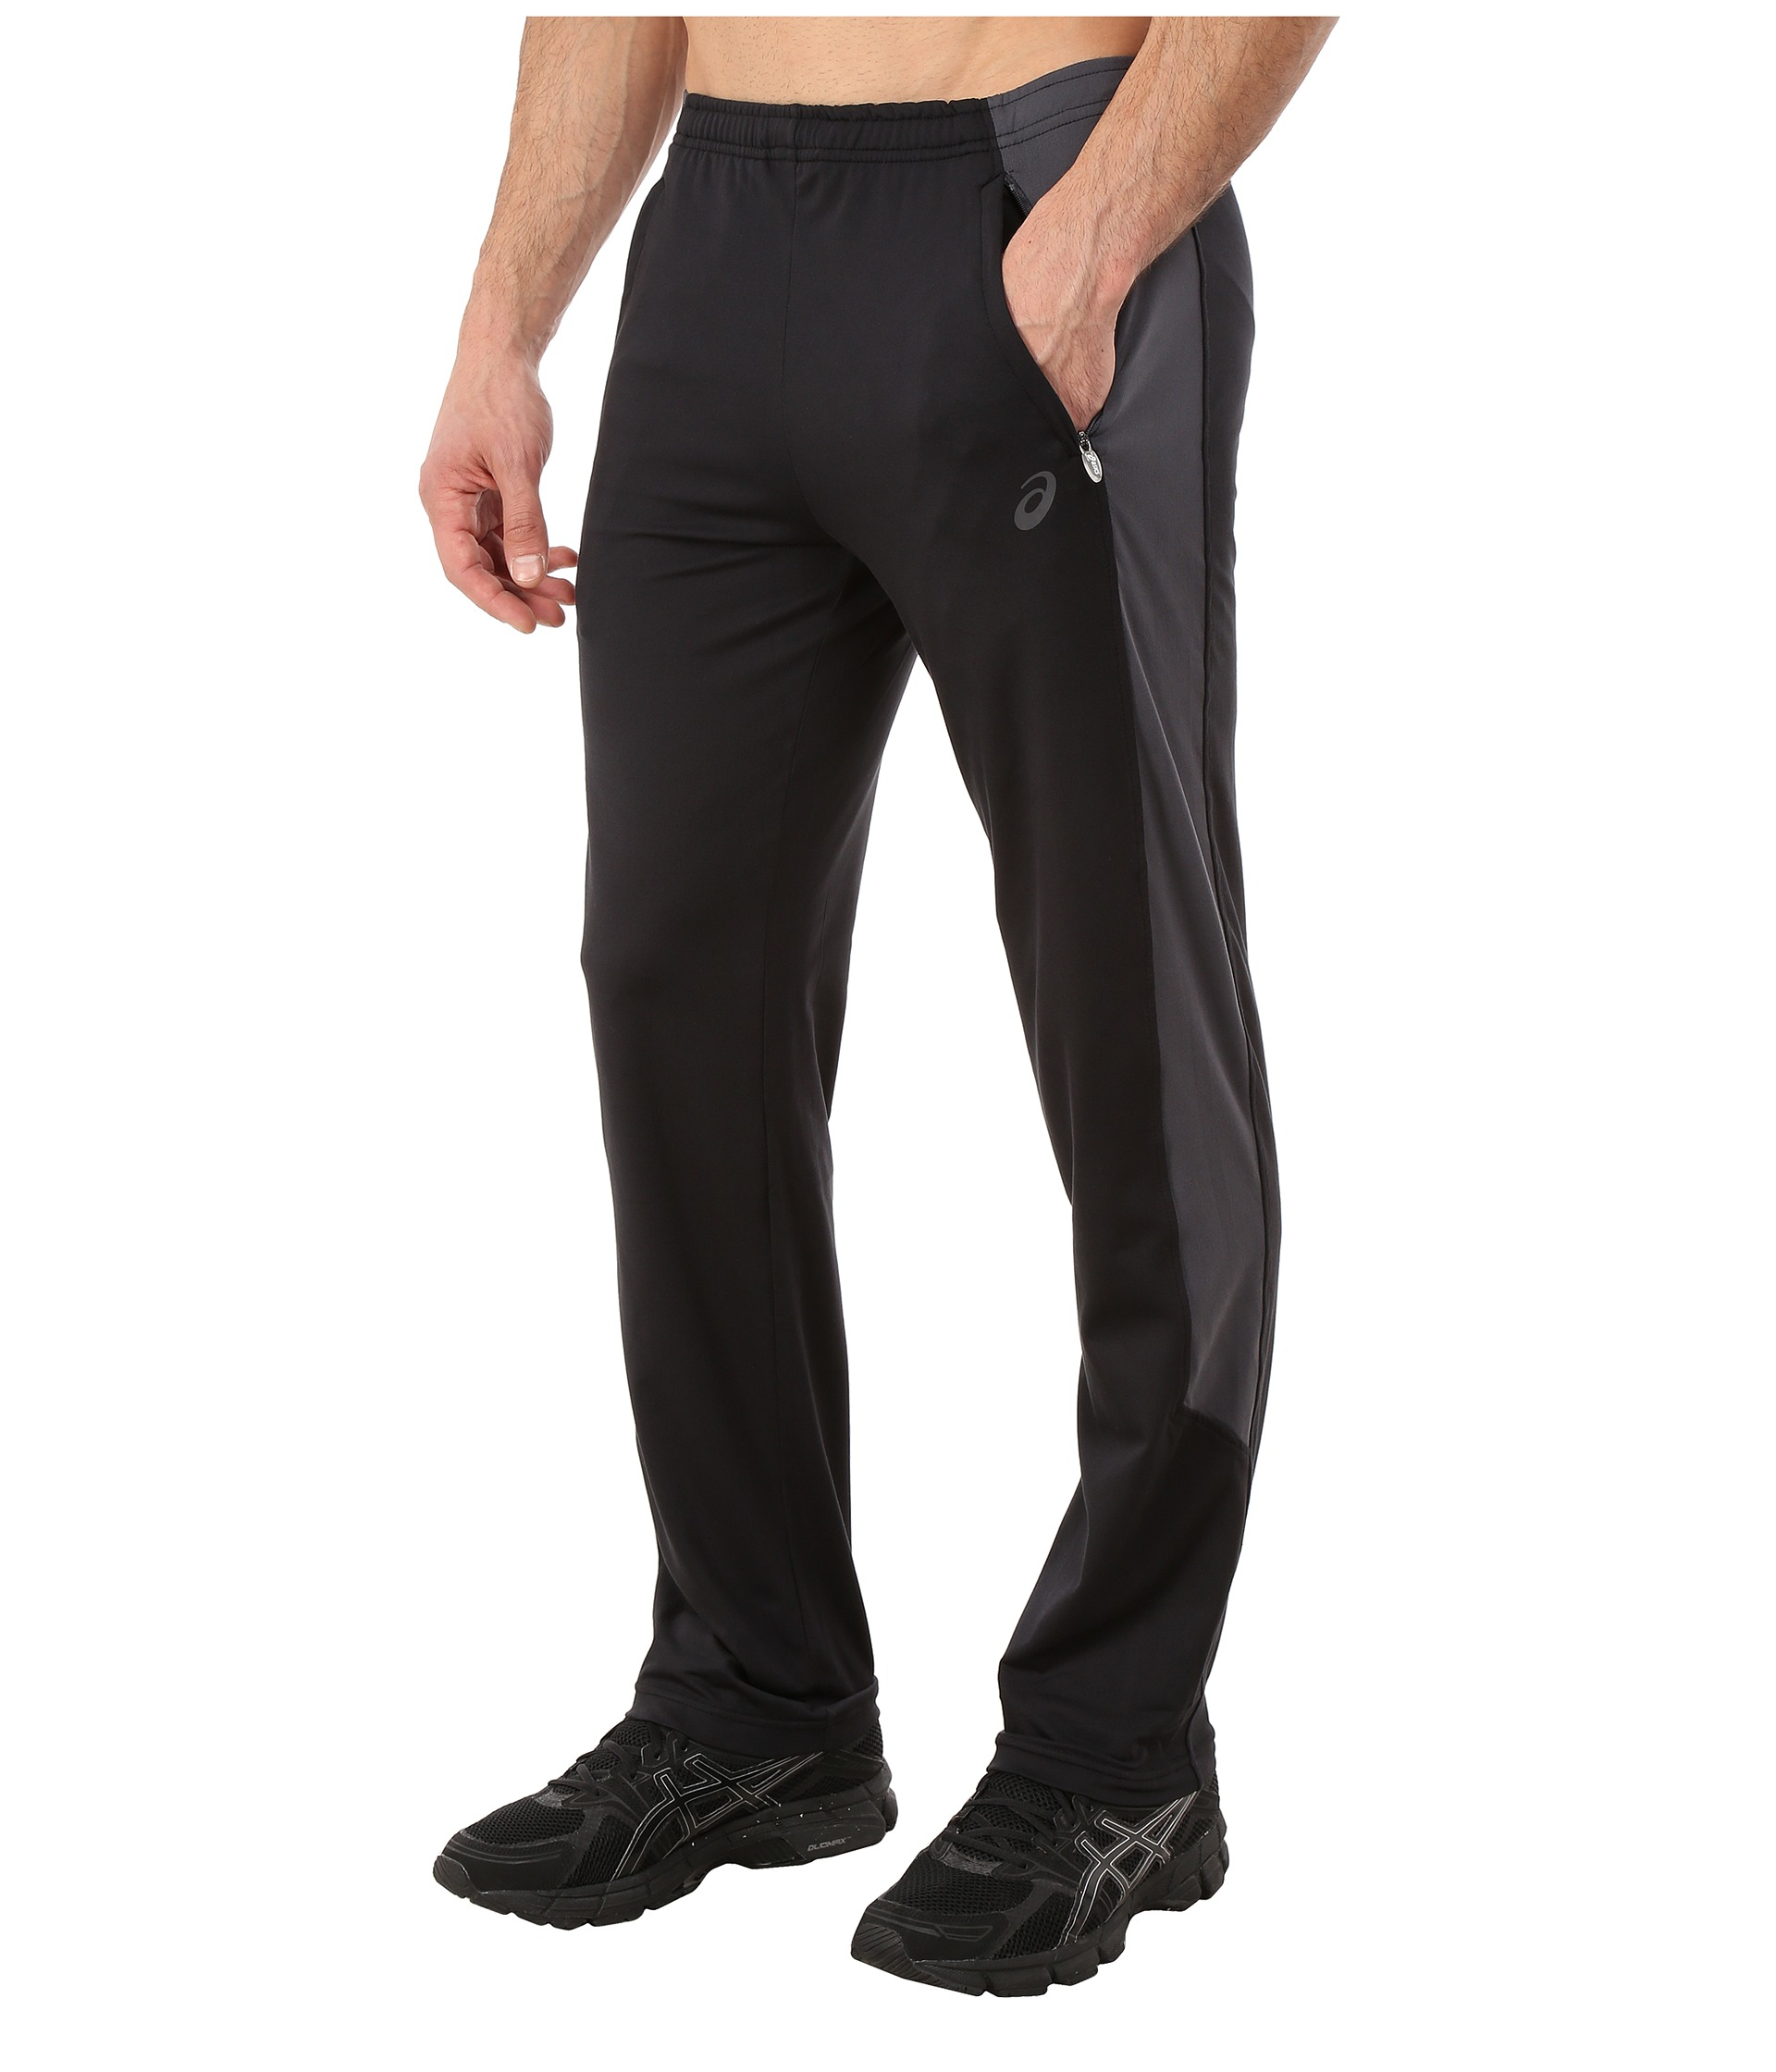 Asics Synthetic Thermopolis® Pants in Black for Men - Lyst